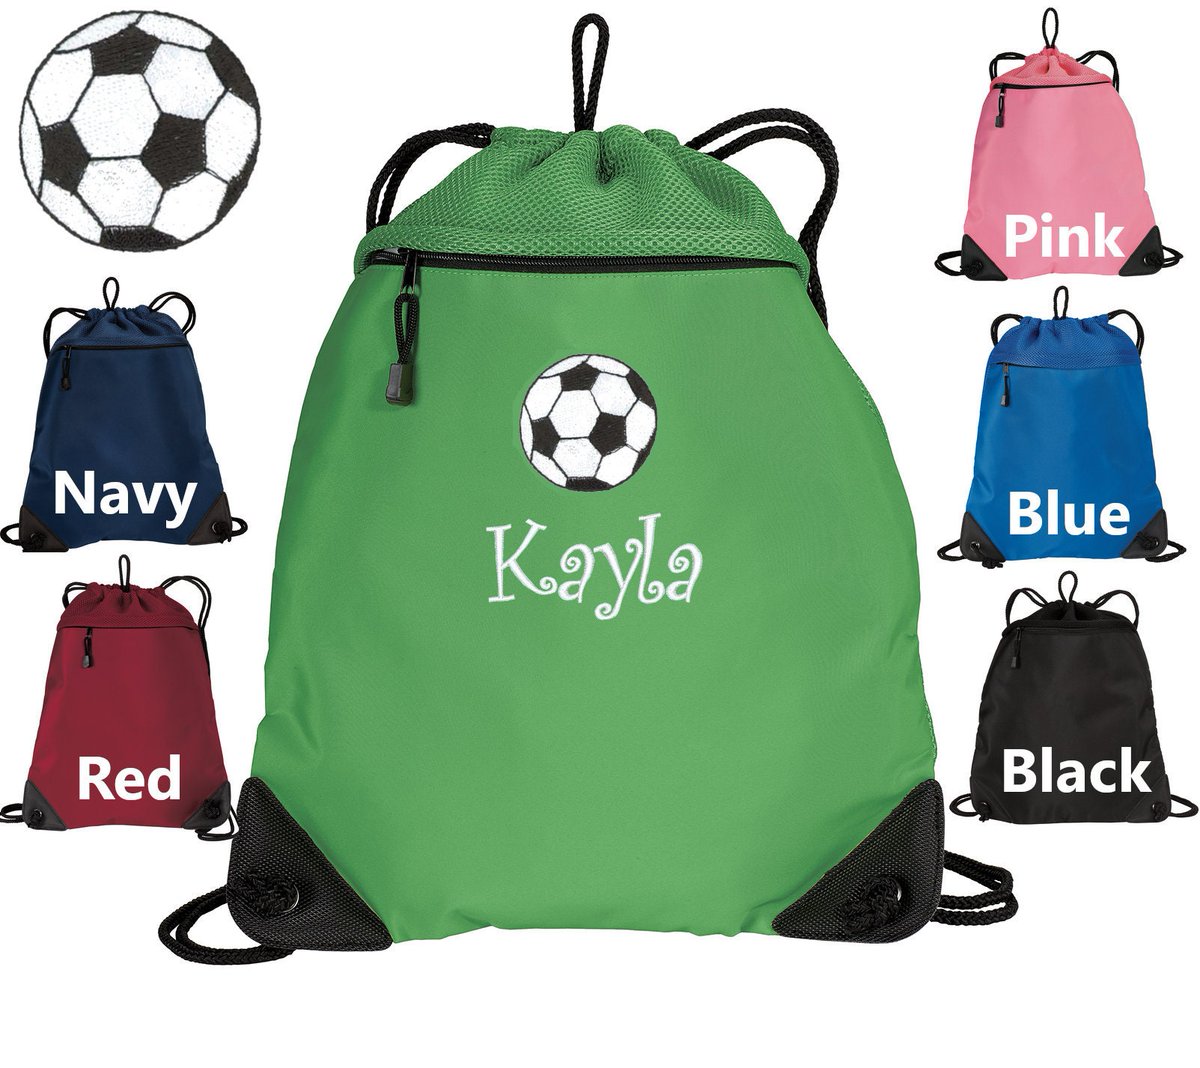 Personalized Soccer Coach Cinch Pack, Coach Gift, Drawstring Gym School PE Pool Backpack, Embroidered Soccer Monogrammed with Custom Name etsy.com/listing/839401…
 #personalized #BoysGift